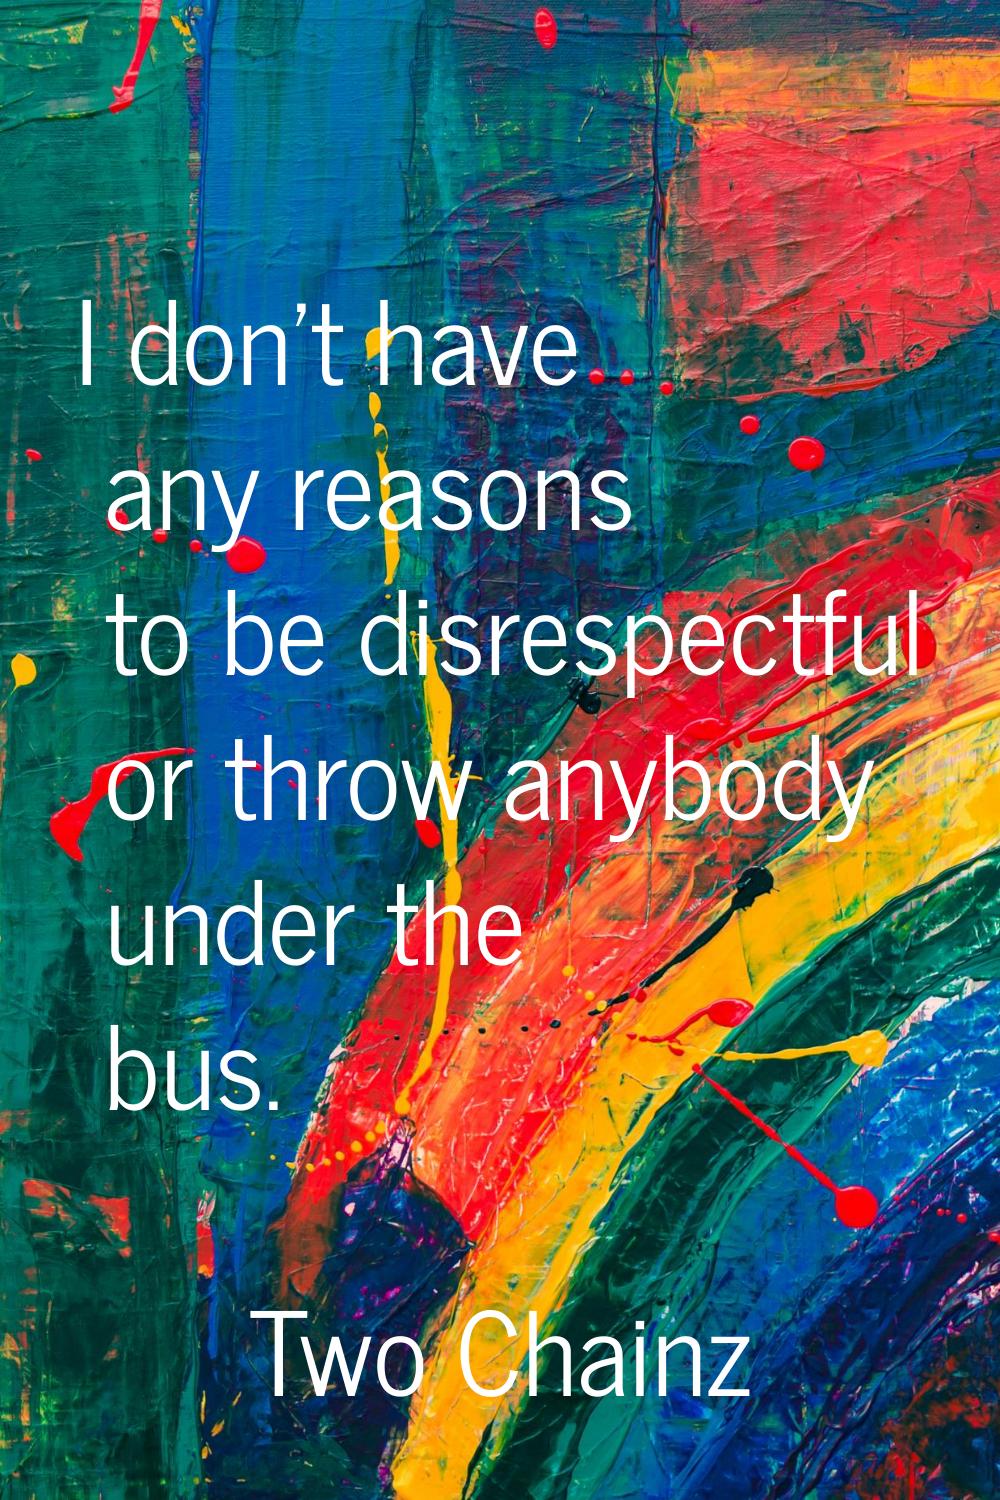 I don't have any reasons to be disrespectful or throw anybody under the bus.